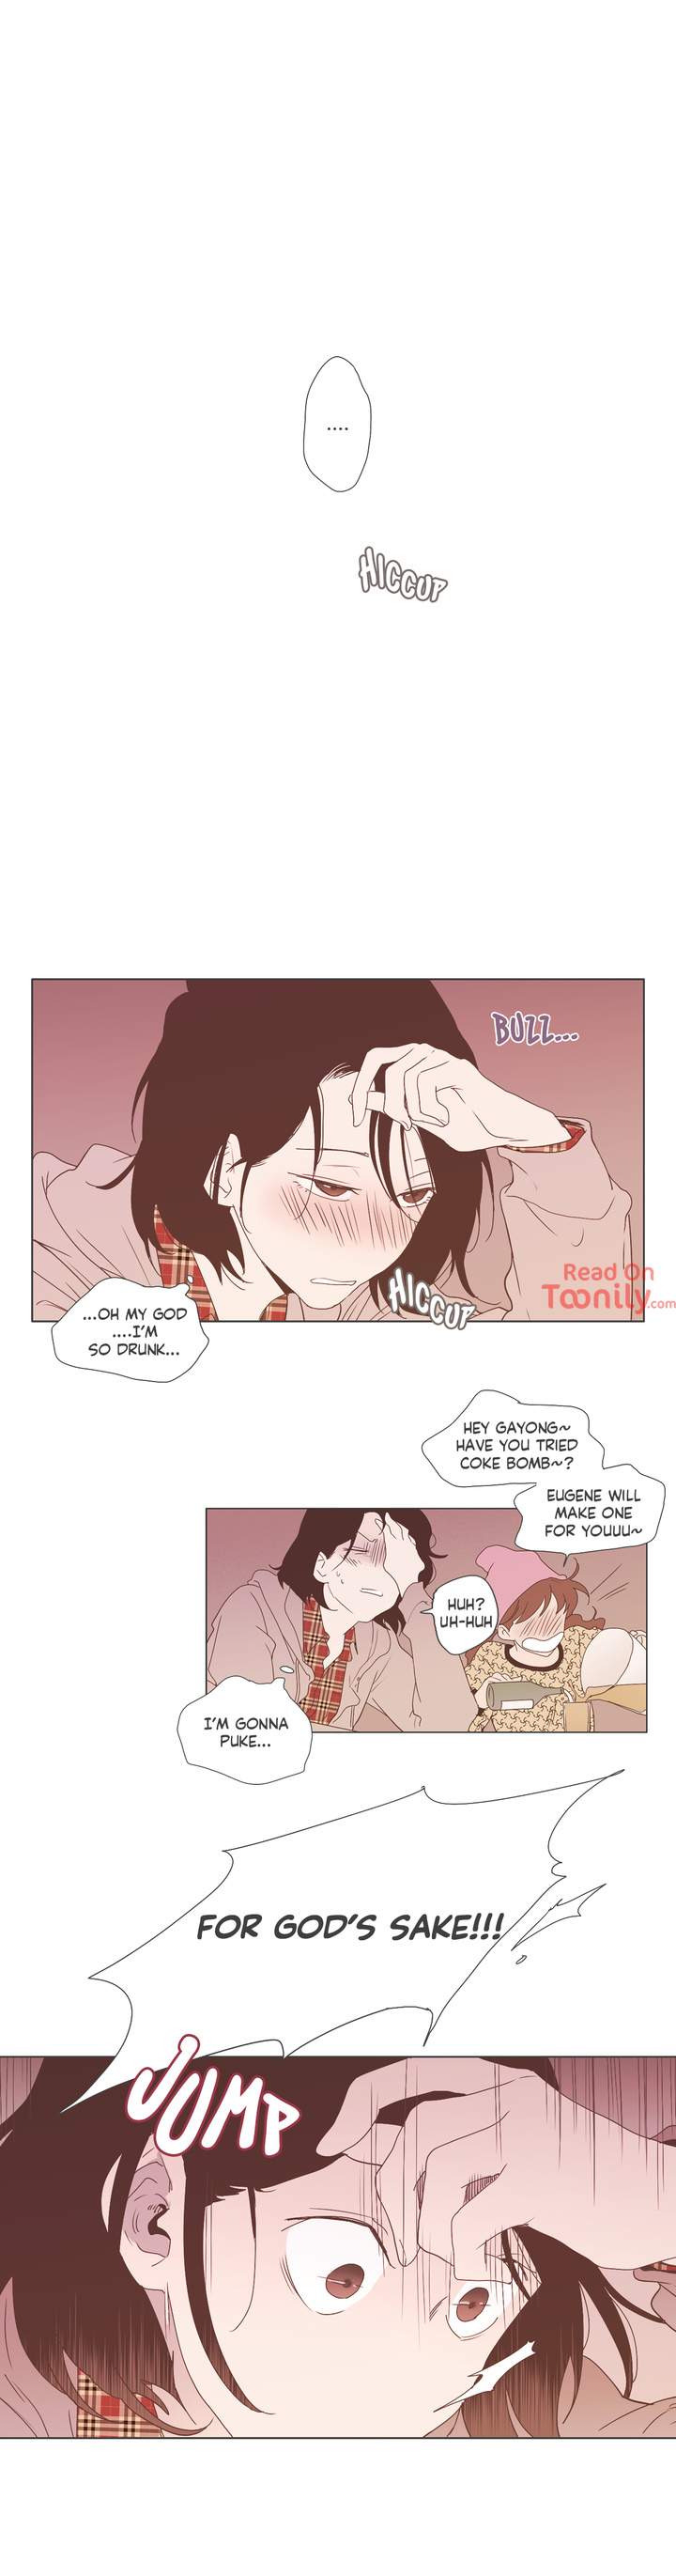 Something About Us - Chapter 6 Page 5